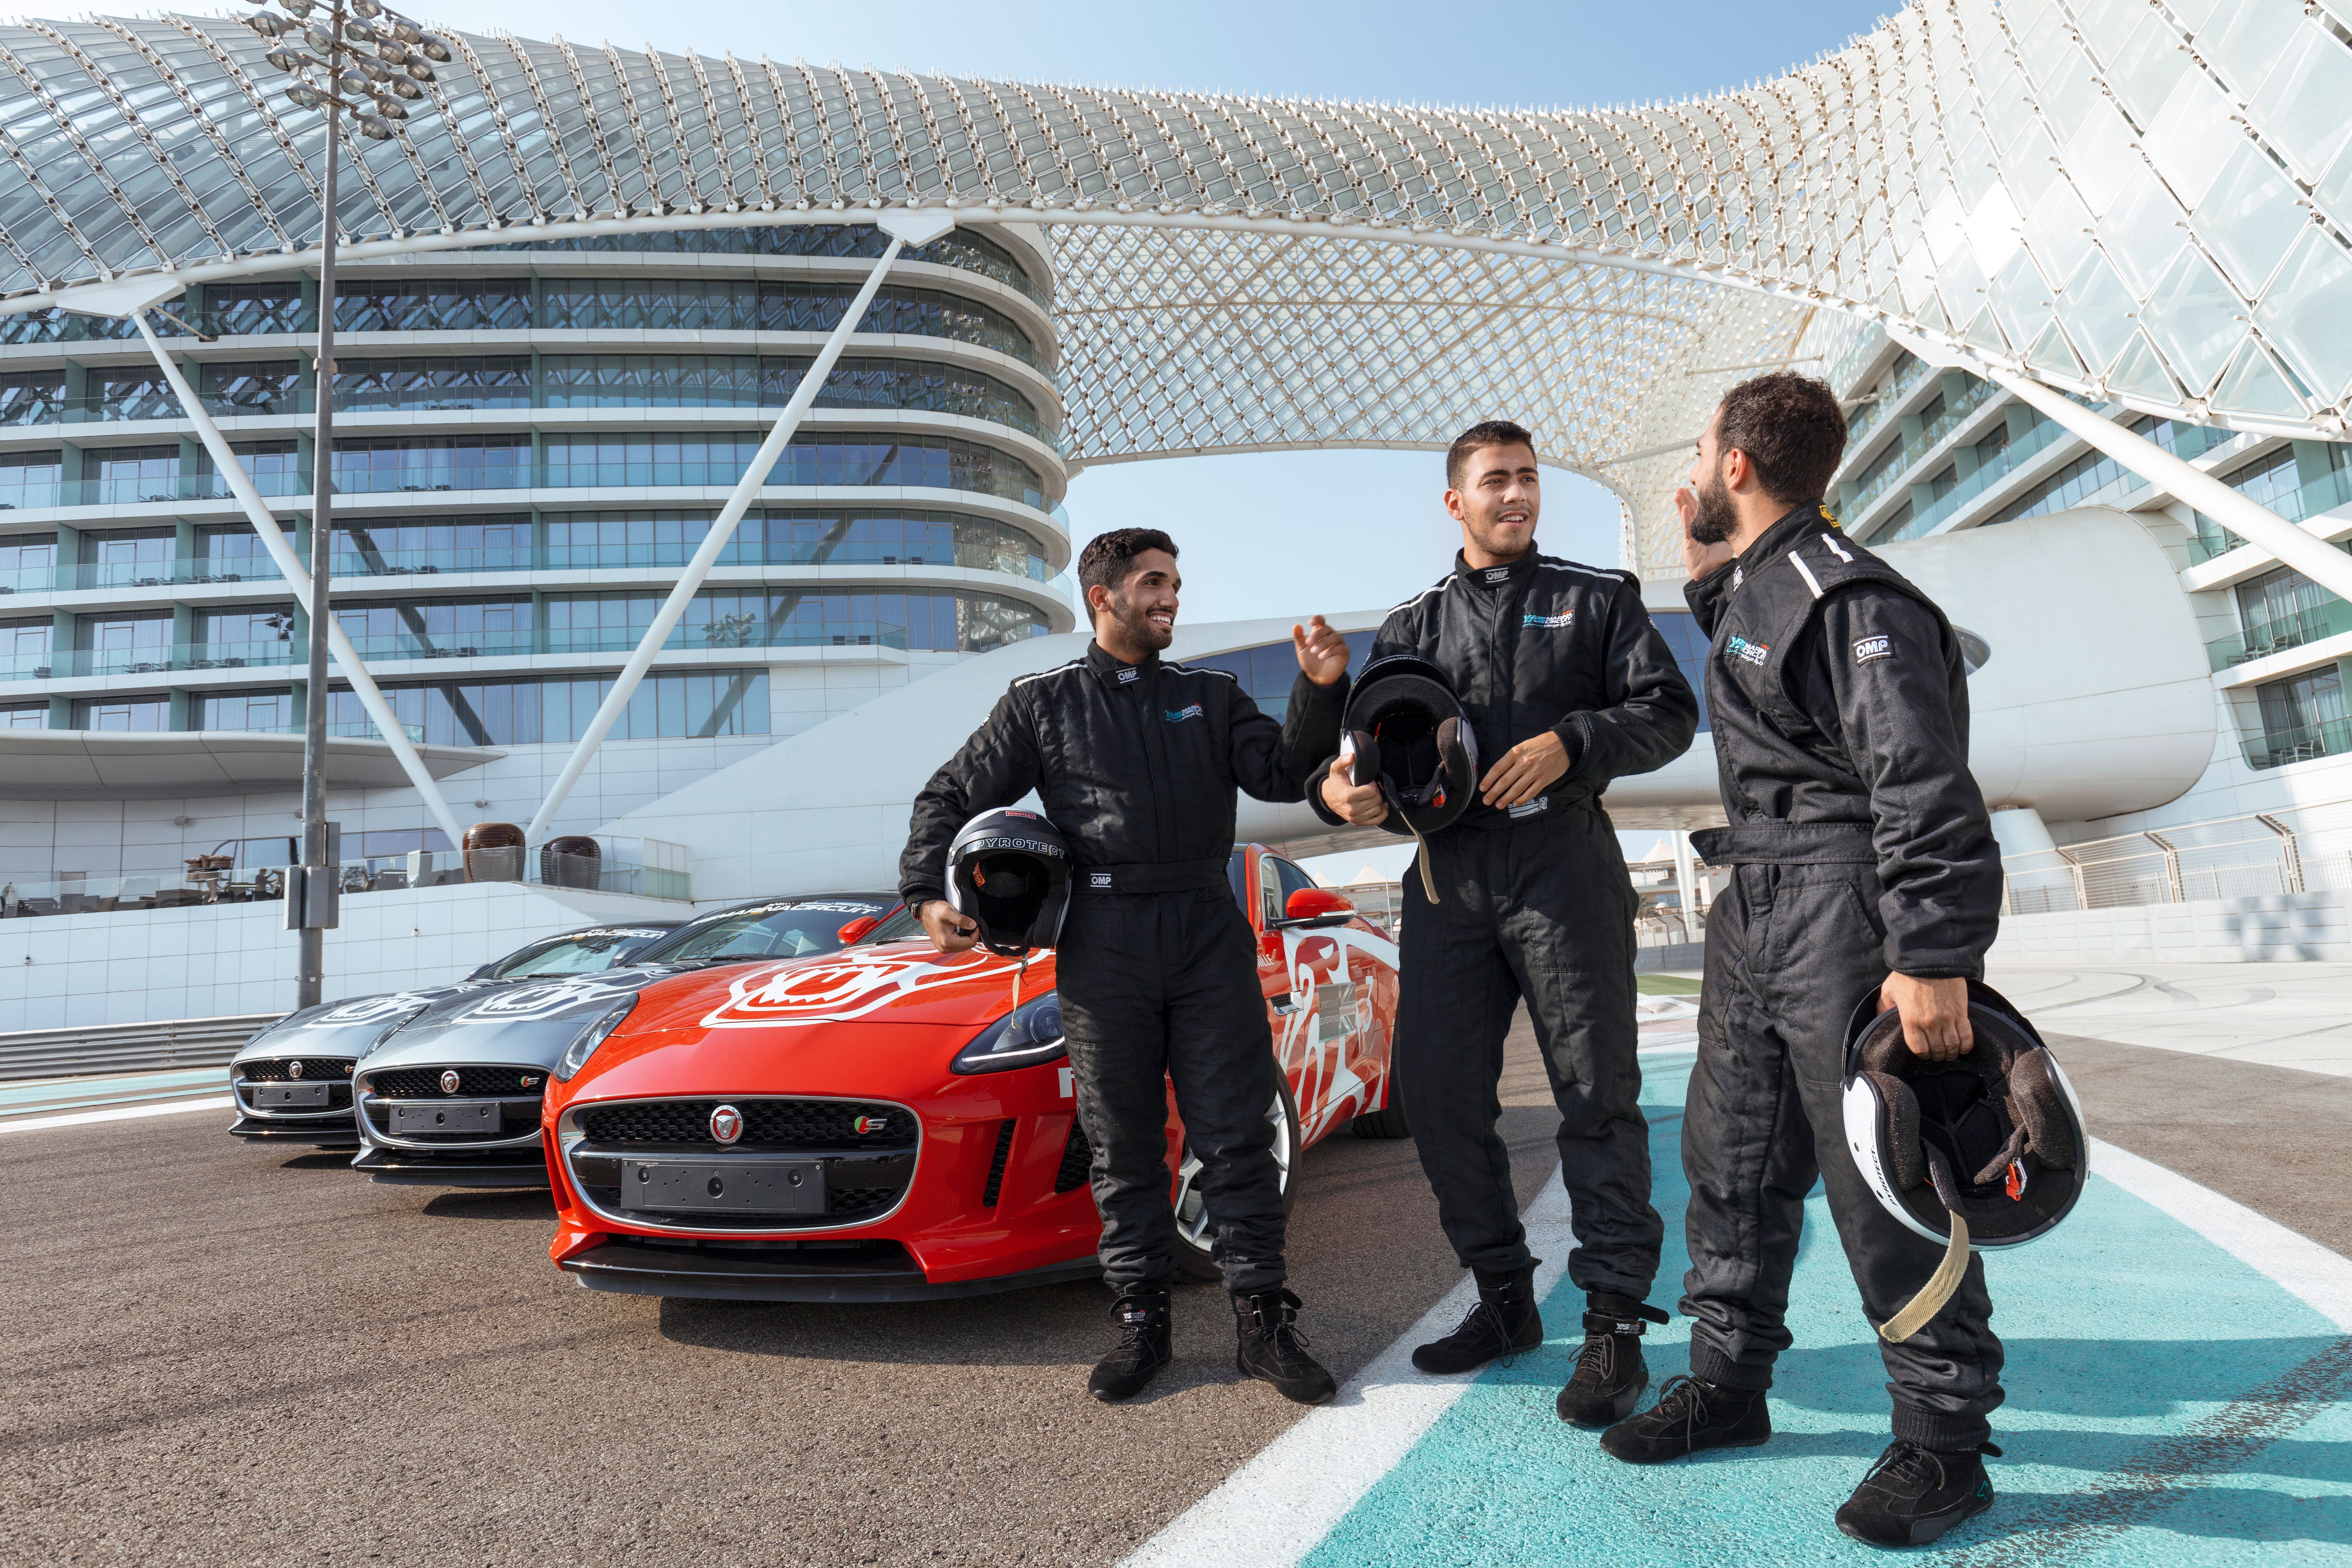 Accelerate and sense the excitement at Yas Marina Circuit